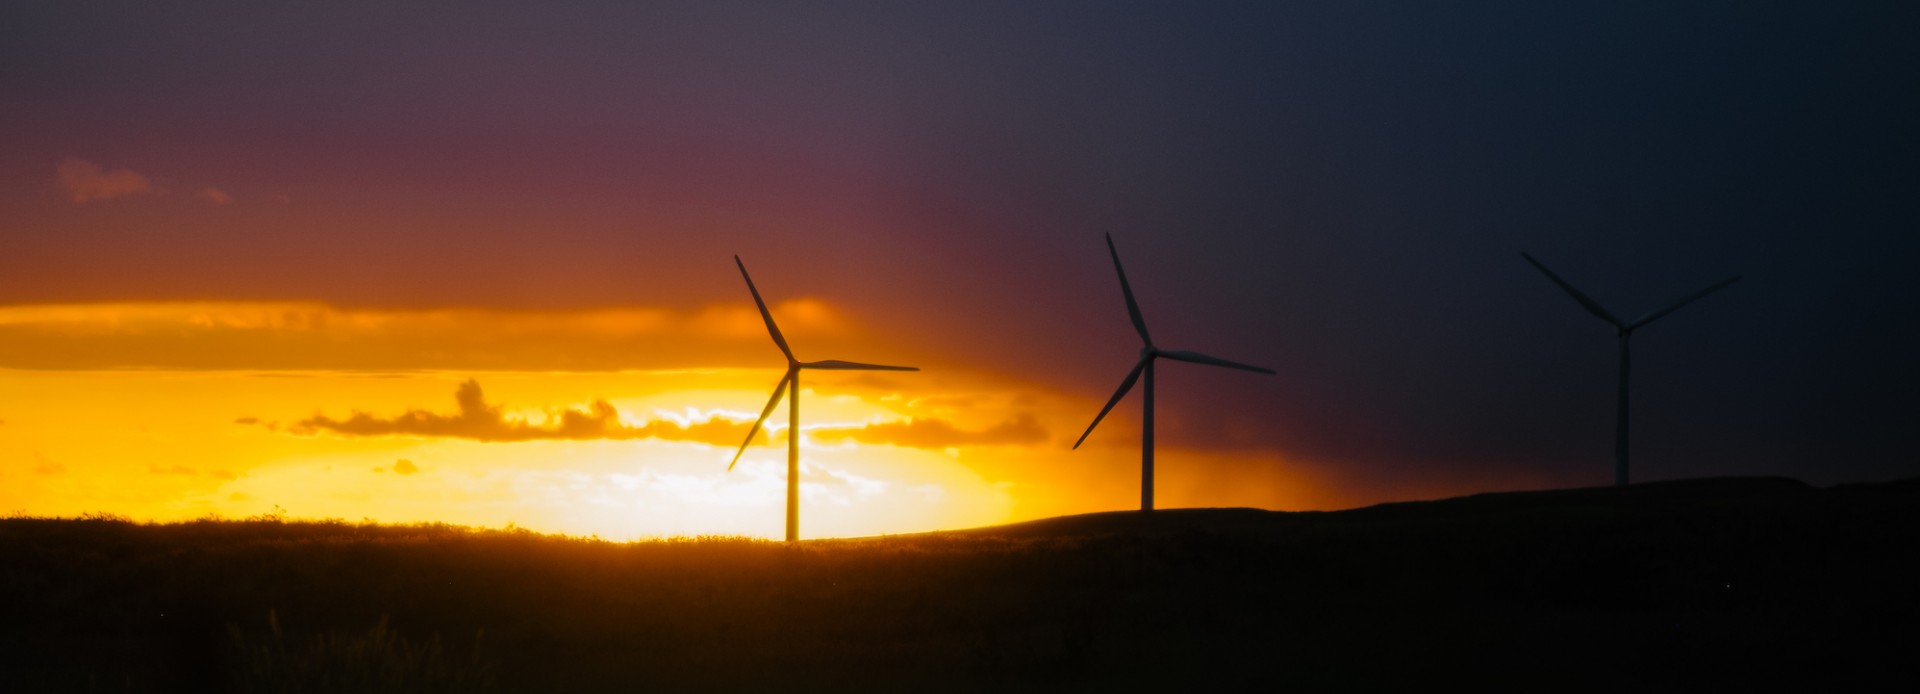 Windmills on a hilly horizon with the sun setting behind them.